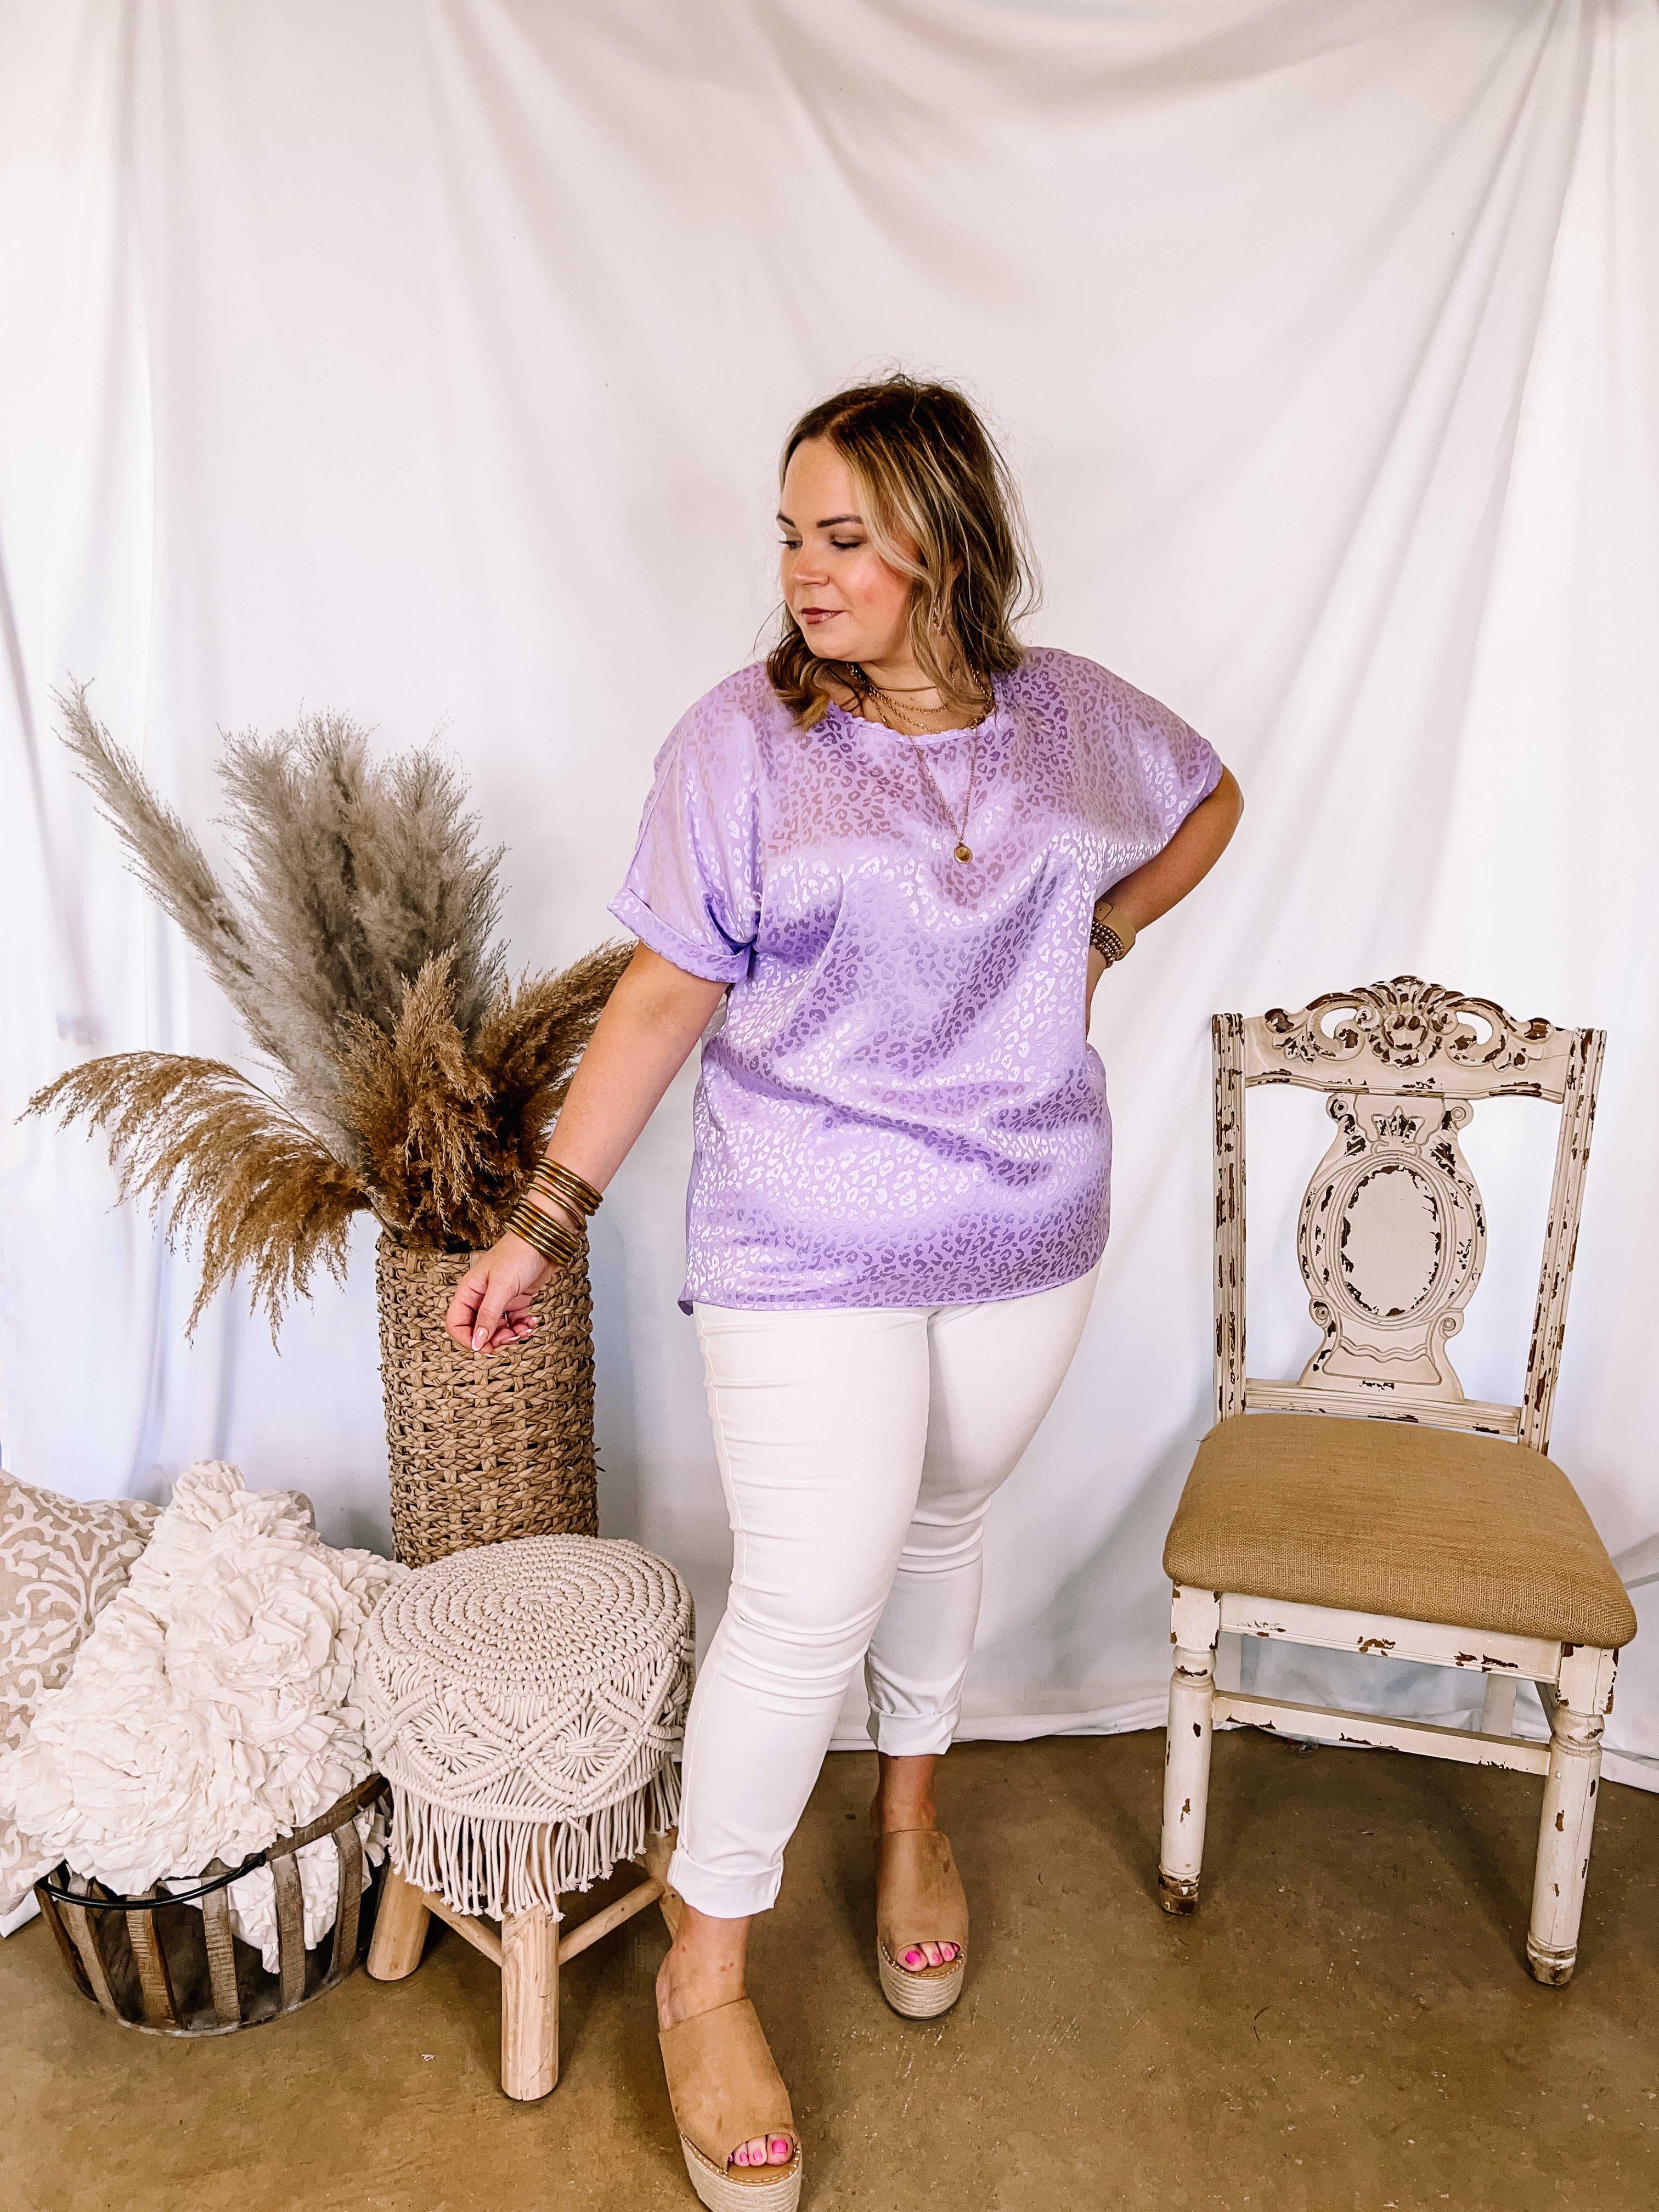 Complete Awe Short Sleeve Satin Leopard Print Top in Lavender - Giddy Up Glamour Boutique